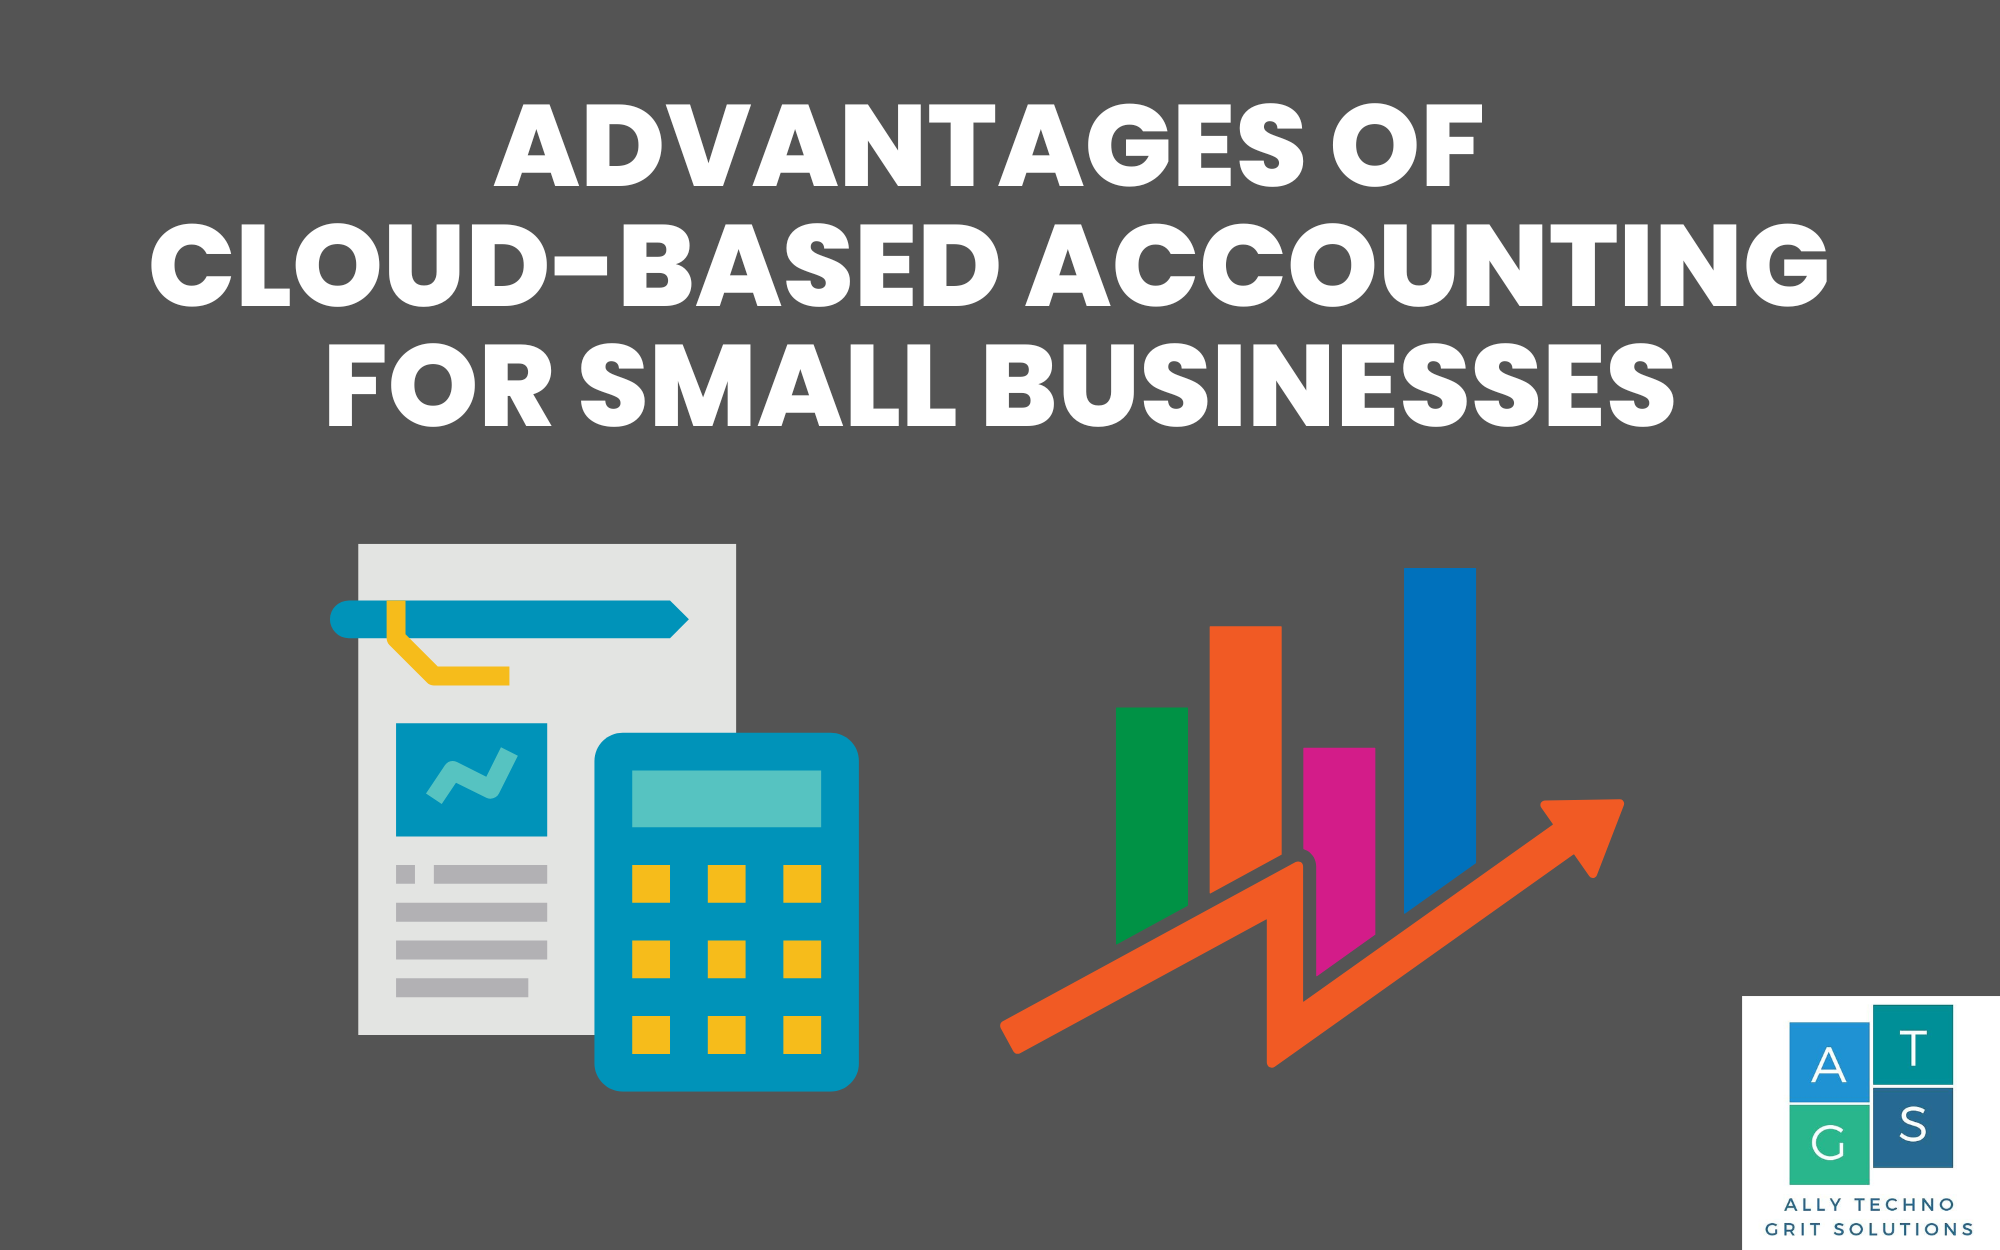 the-advantages-of-cloud-based-accounting-for-small-businesses-1683183314.png?0.54804036897224